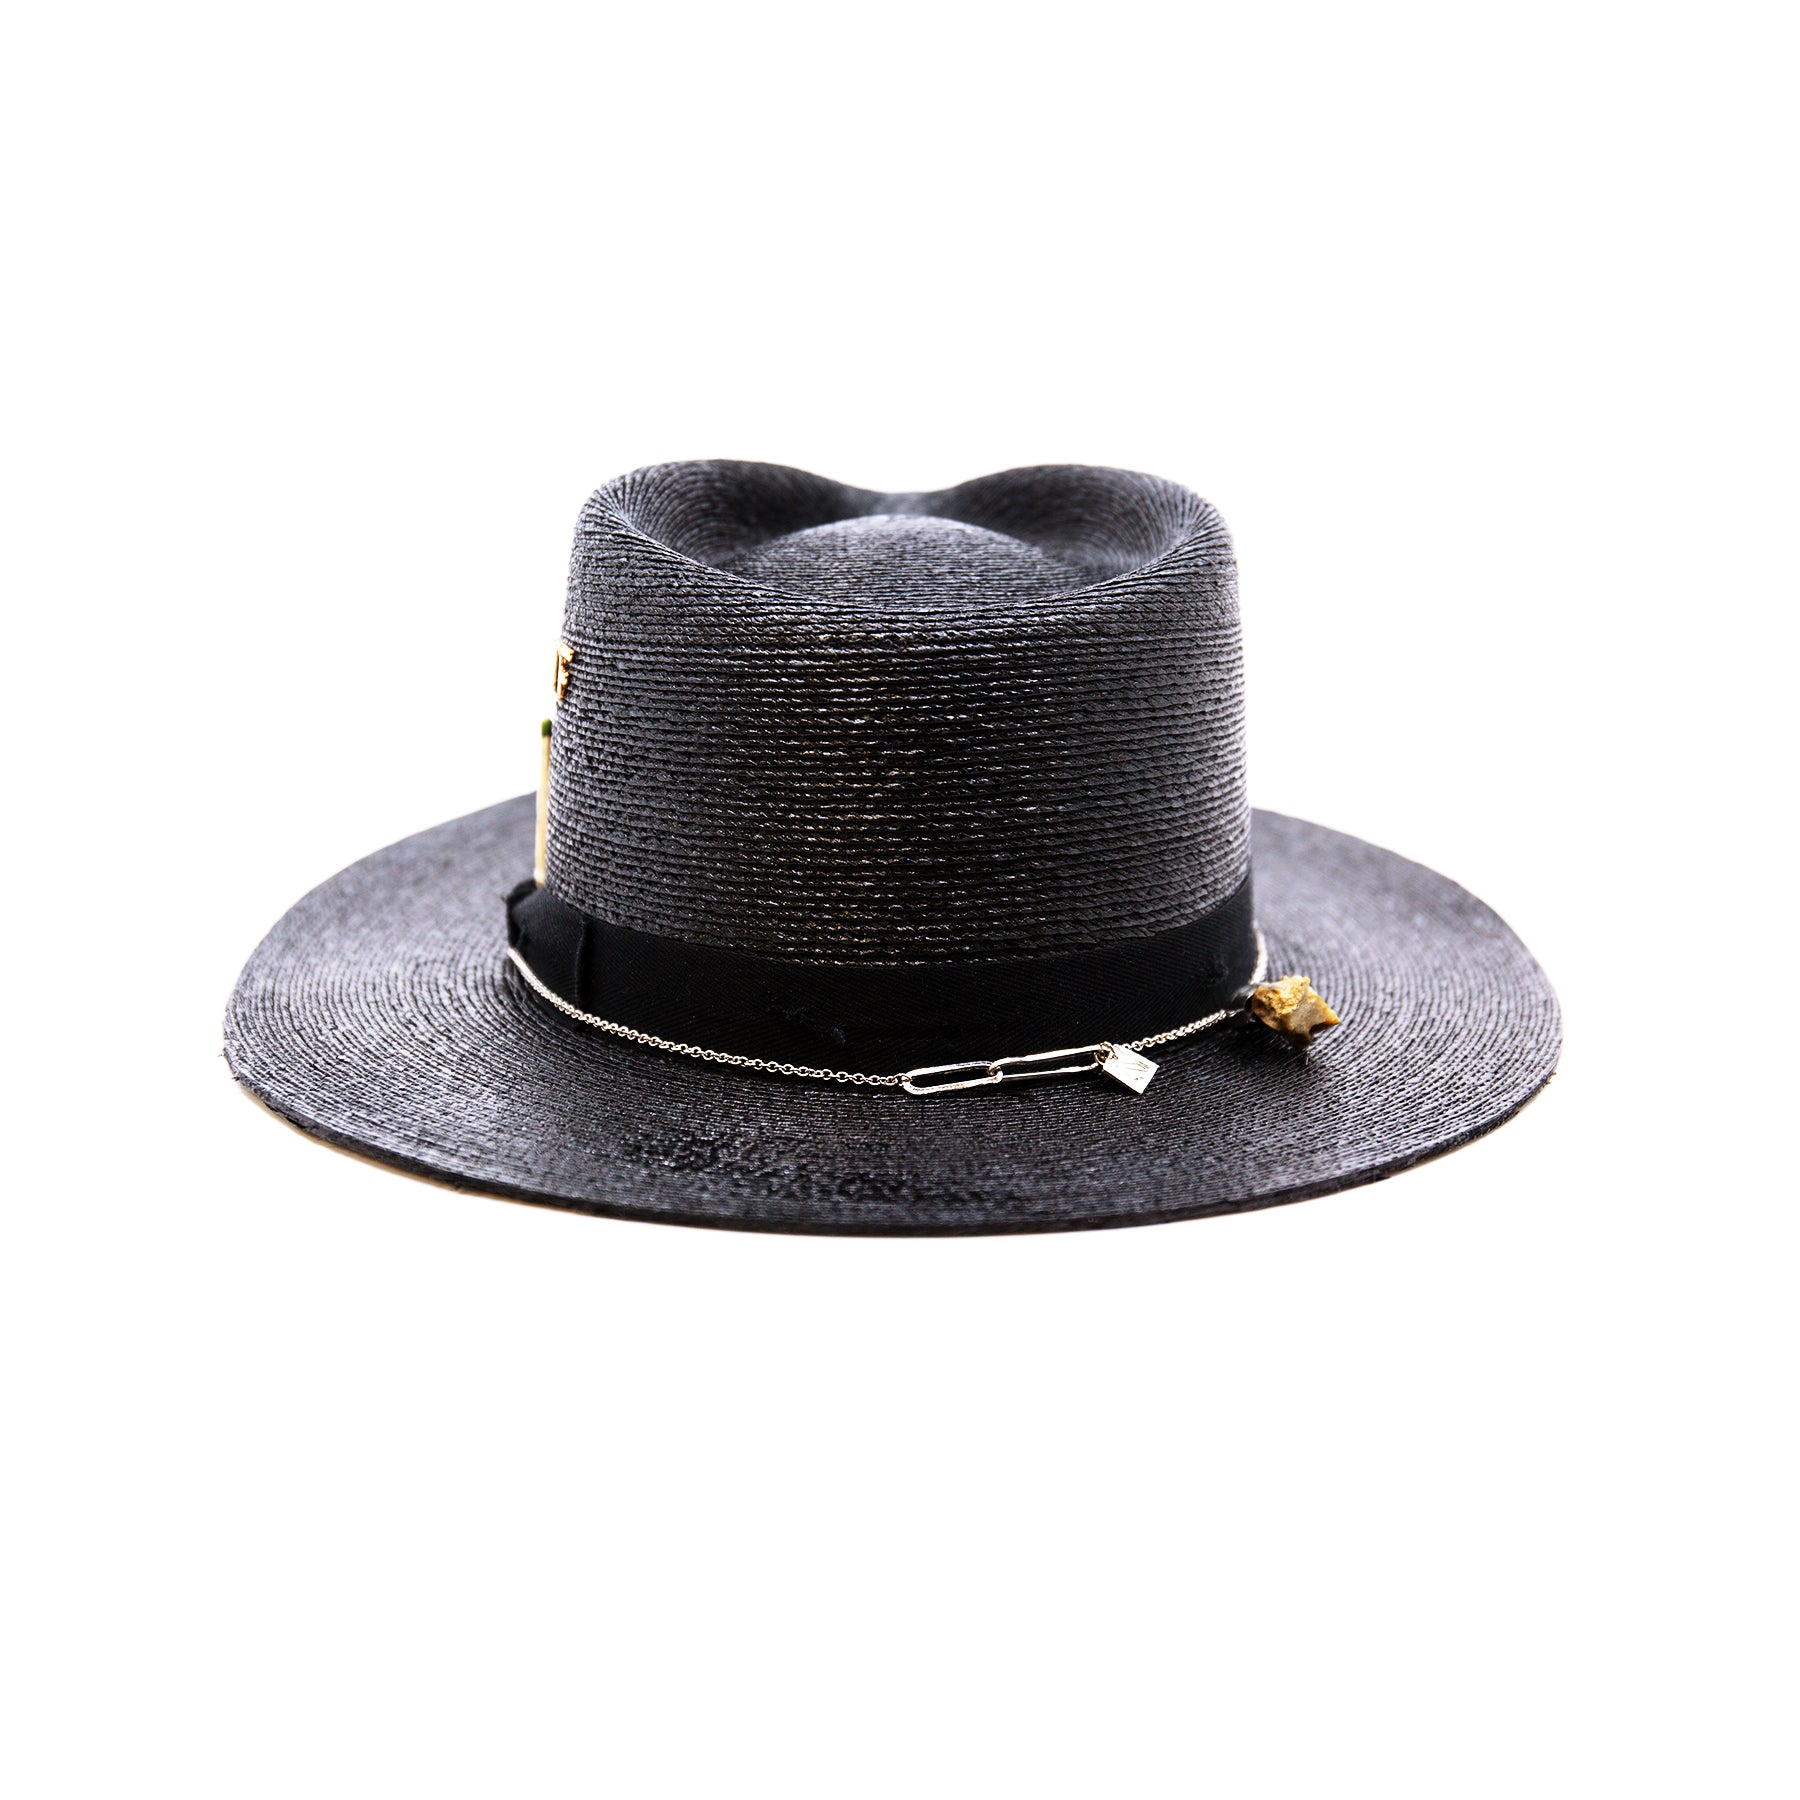 Numero 41  100% Mexican straw in Black  1" black herringbone band and bow with light distressing   NF Italian chain on base   Cartridge brass hat swag clip   NF jewelry pieces on crown   Woven in Mexico  Slight cowboy flanged brim  Made in USA